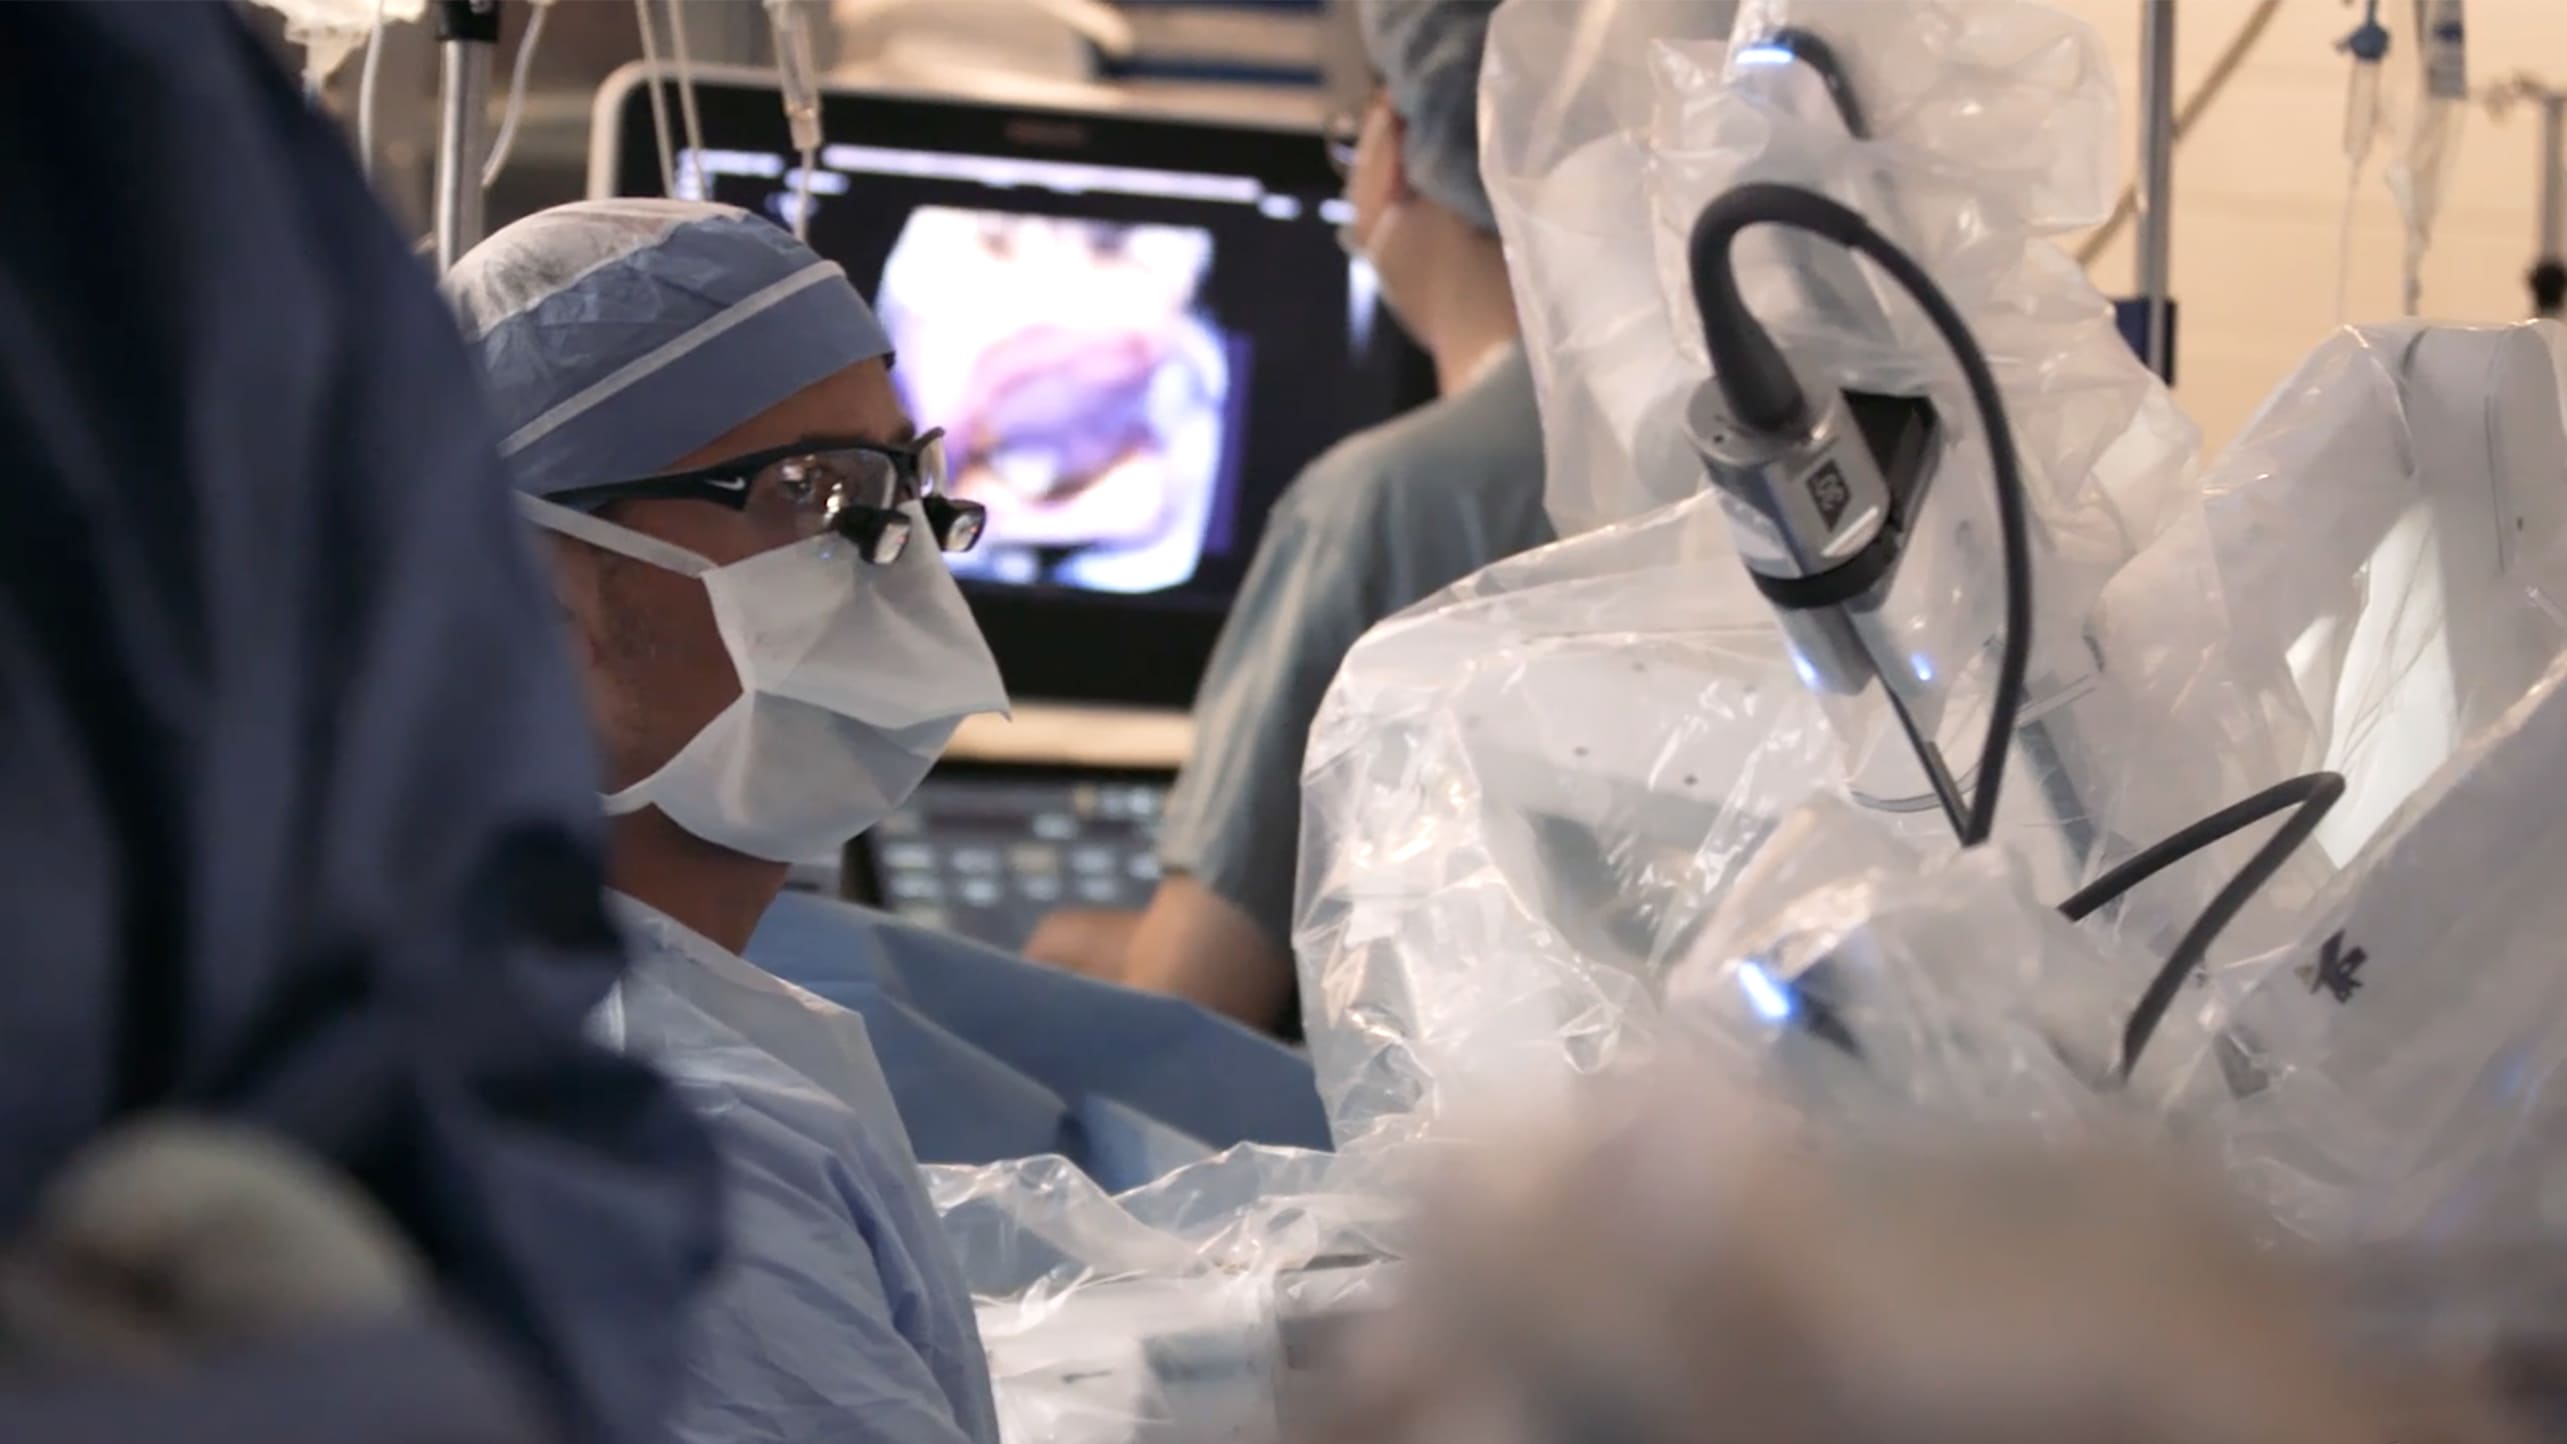 A surgeon monitors the arms of a robotic surgery system during a cardiac surgery procedure.